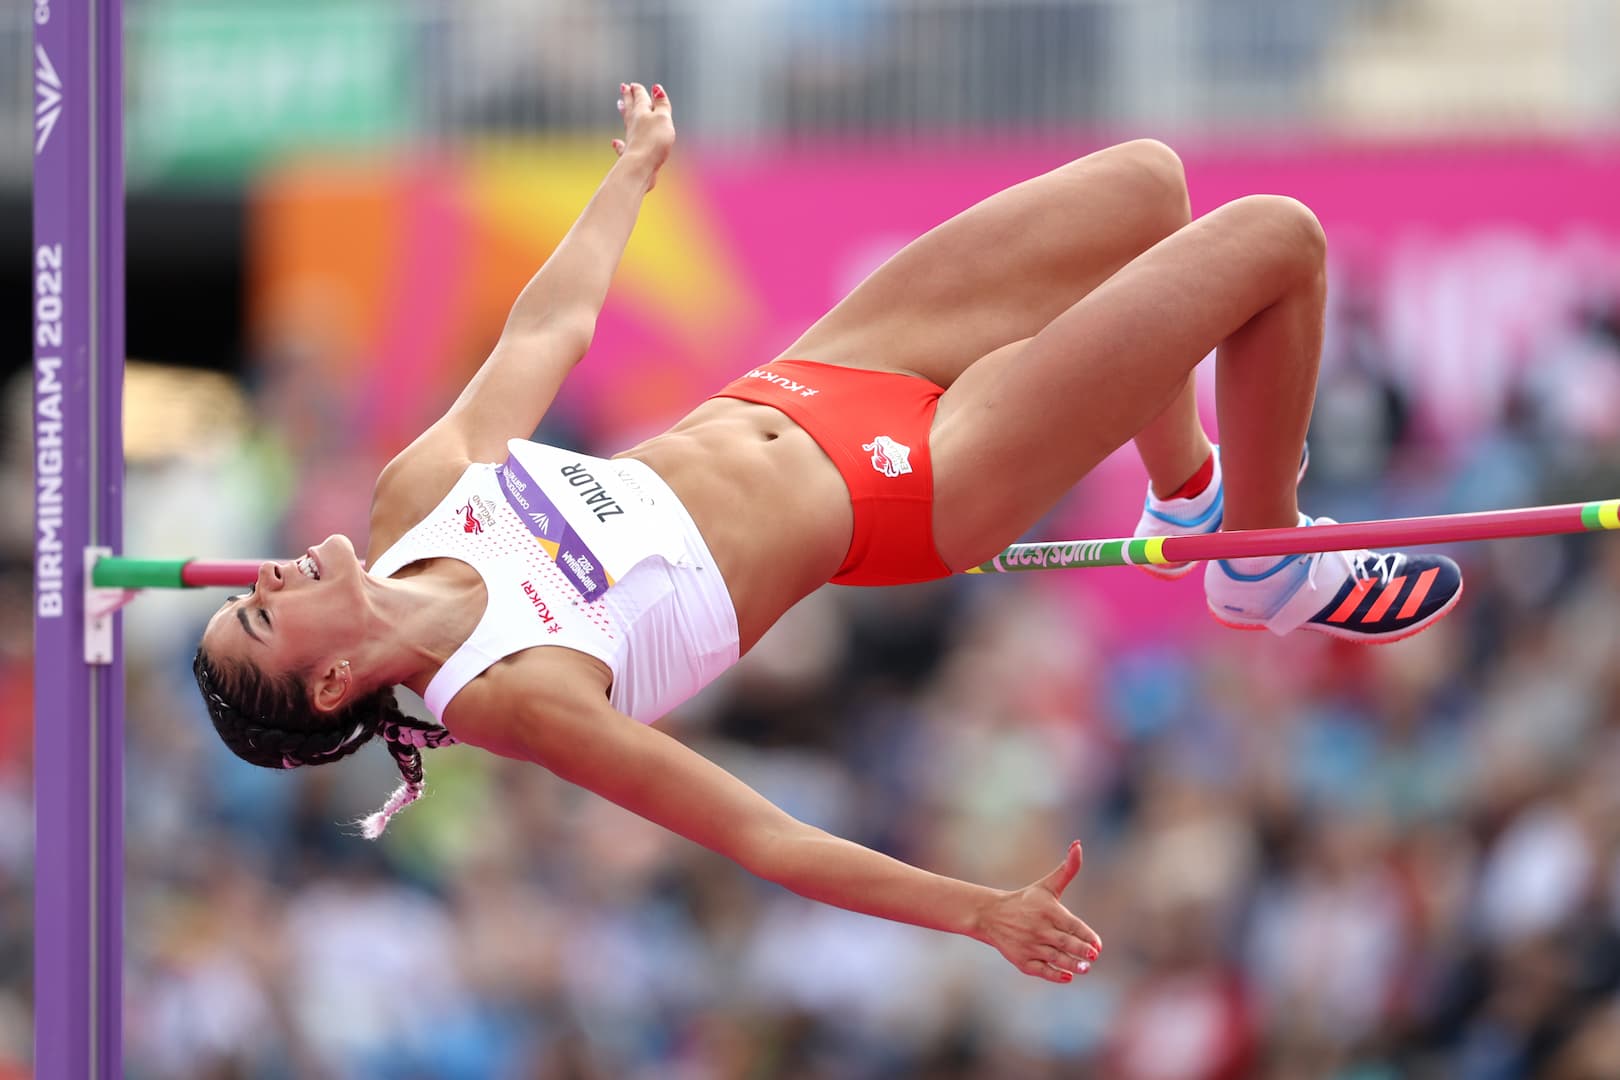 Laura Zialor jumping at the Commonwealth Games